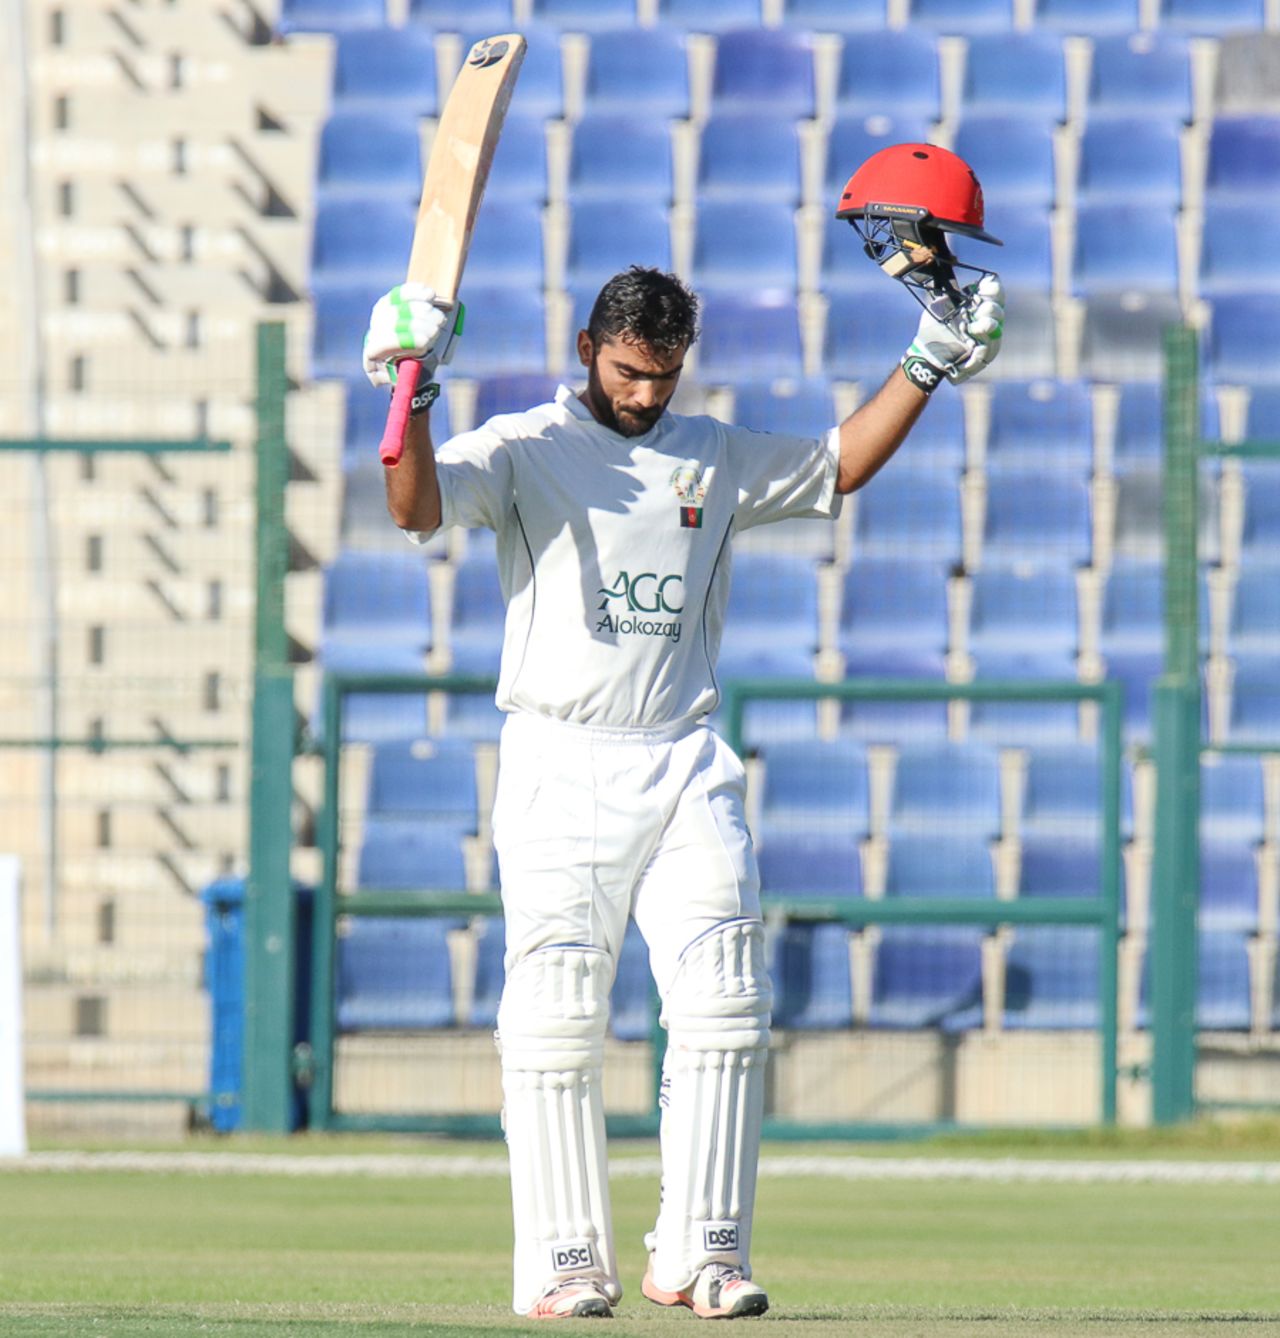 Ihsanullah demonstrates his humility with a reserved celebration after notching his maiden first-class century, UAE v Afghanistan, 2015-17 Intercontinental Cup, 1st day, Abu Dhabi, November 29, 2017